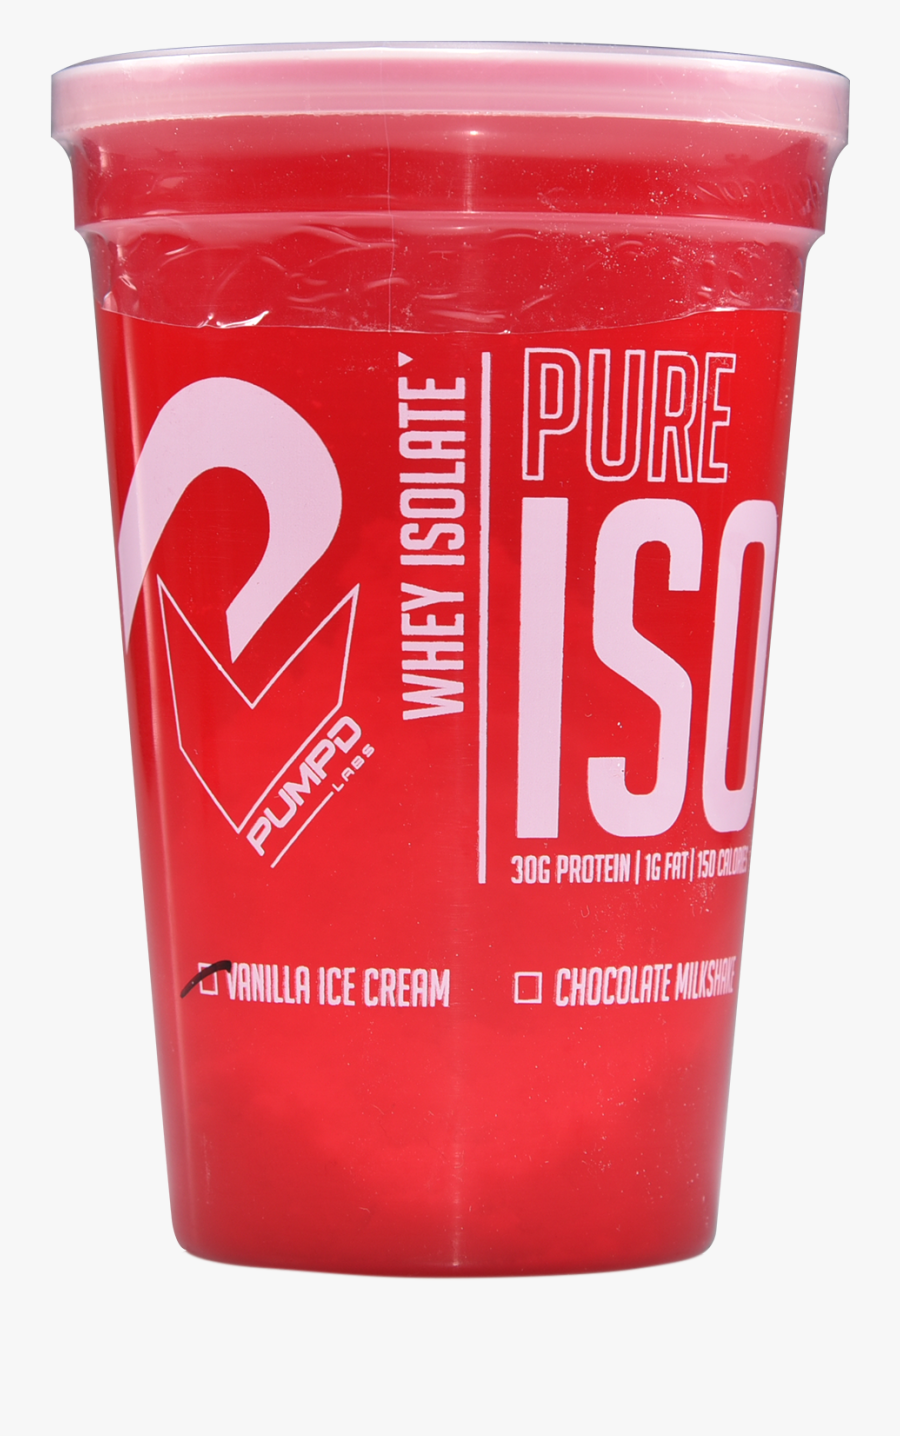 Pure Iso Sample 2 Cups For $5 - Box, Transparent Clipart